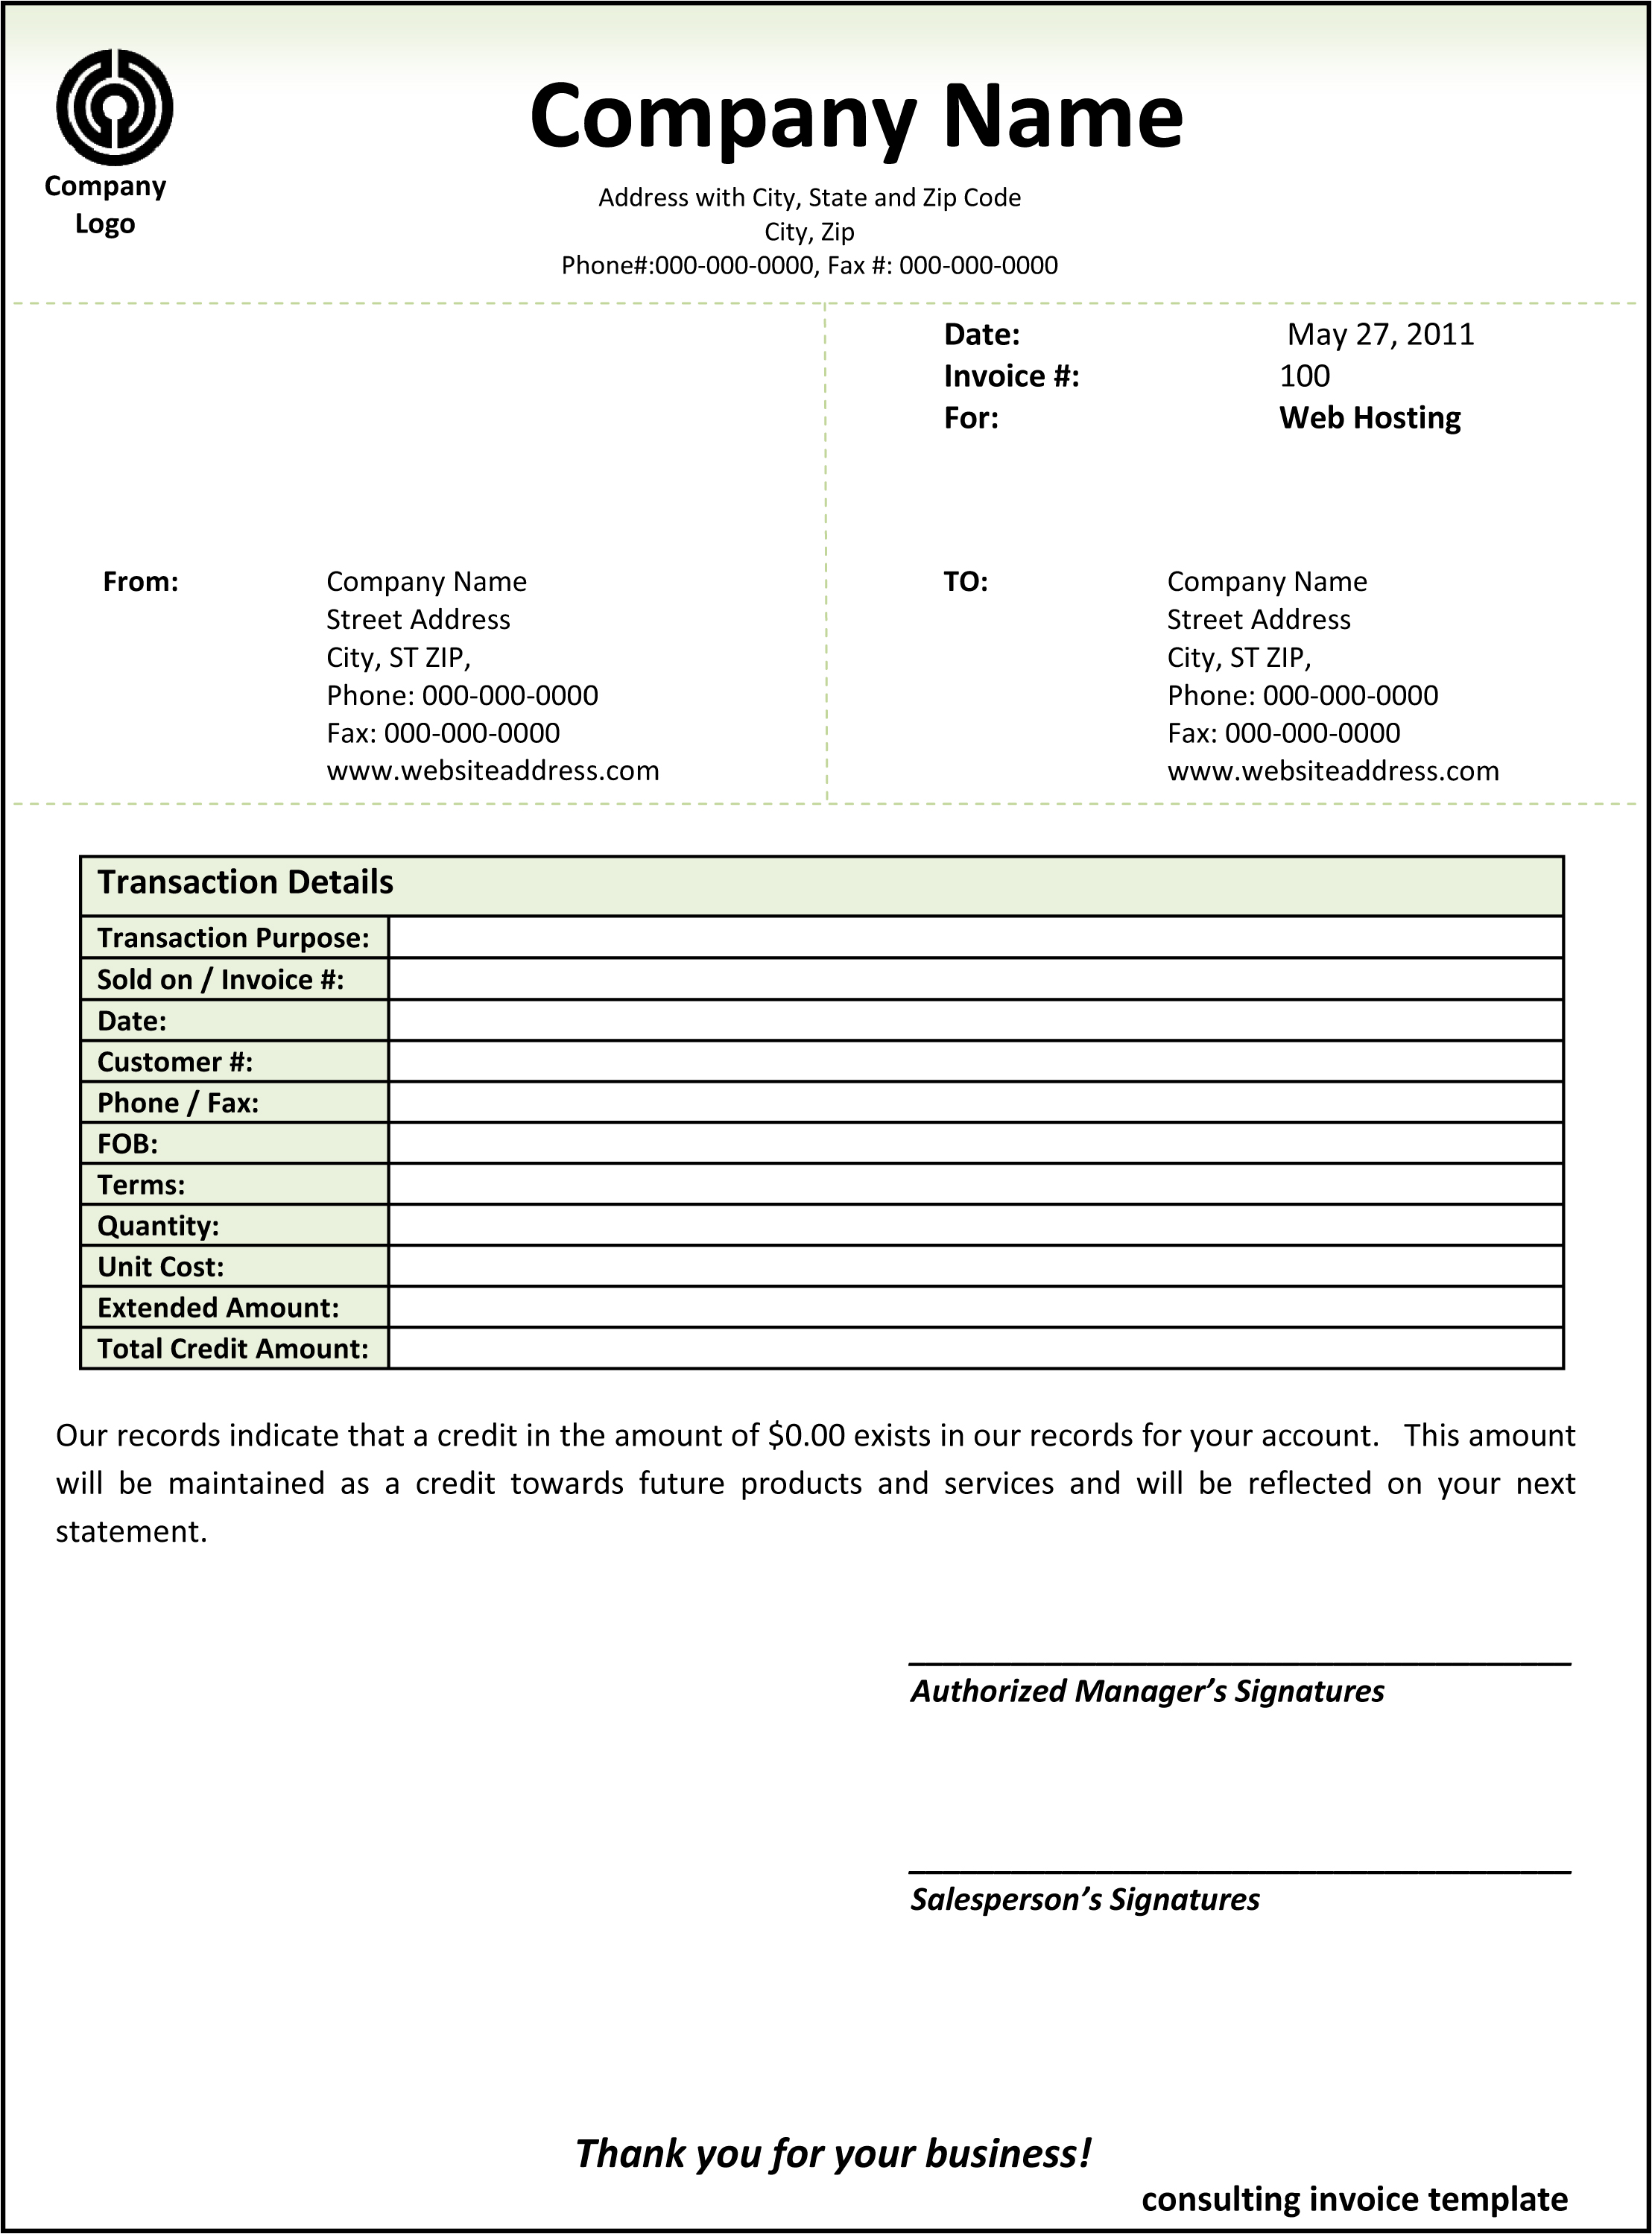 consulting-invoice-template-word-invoice-example